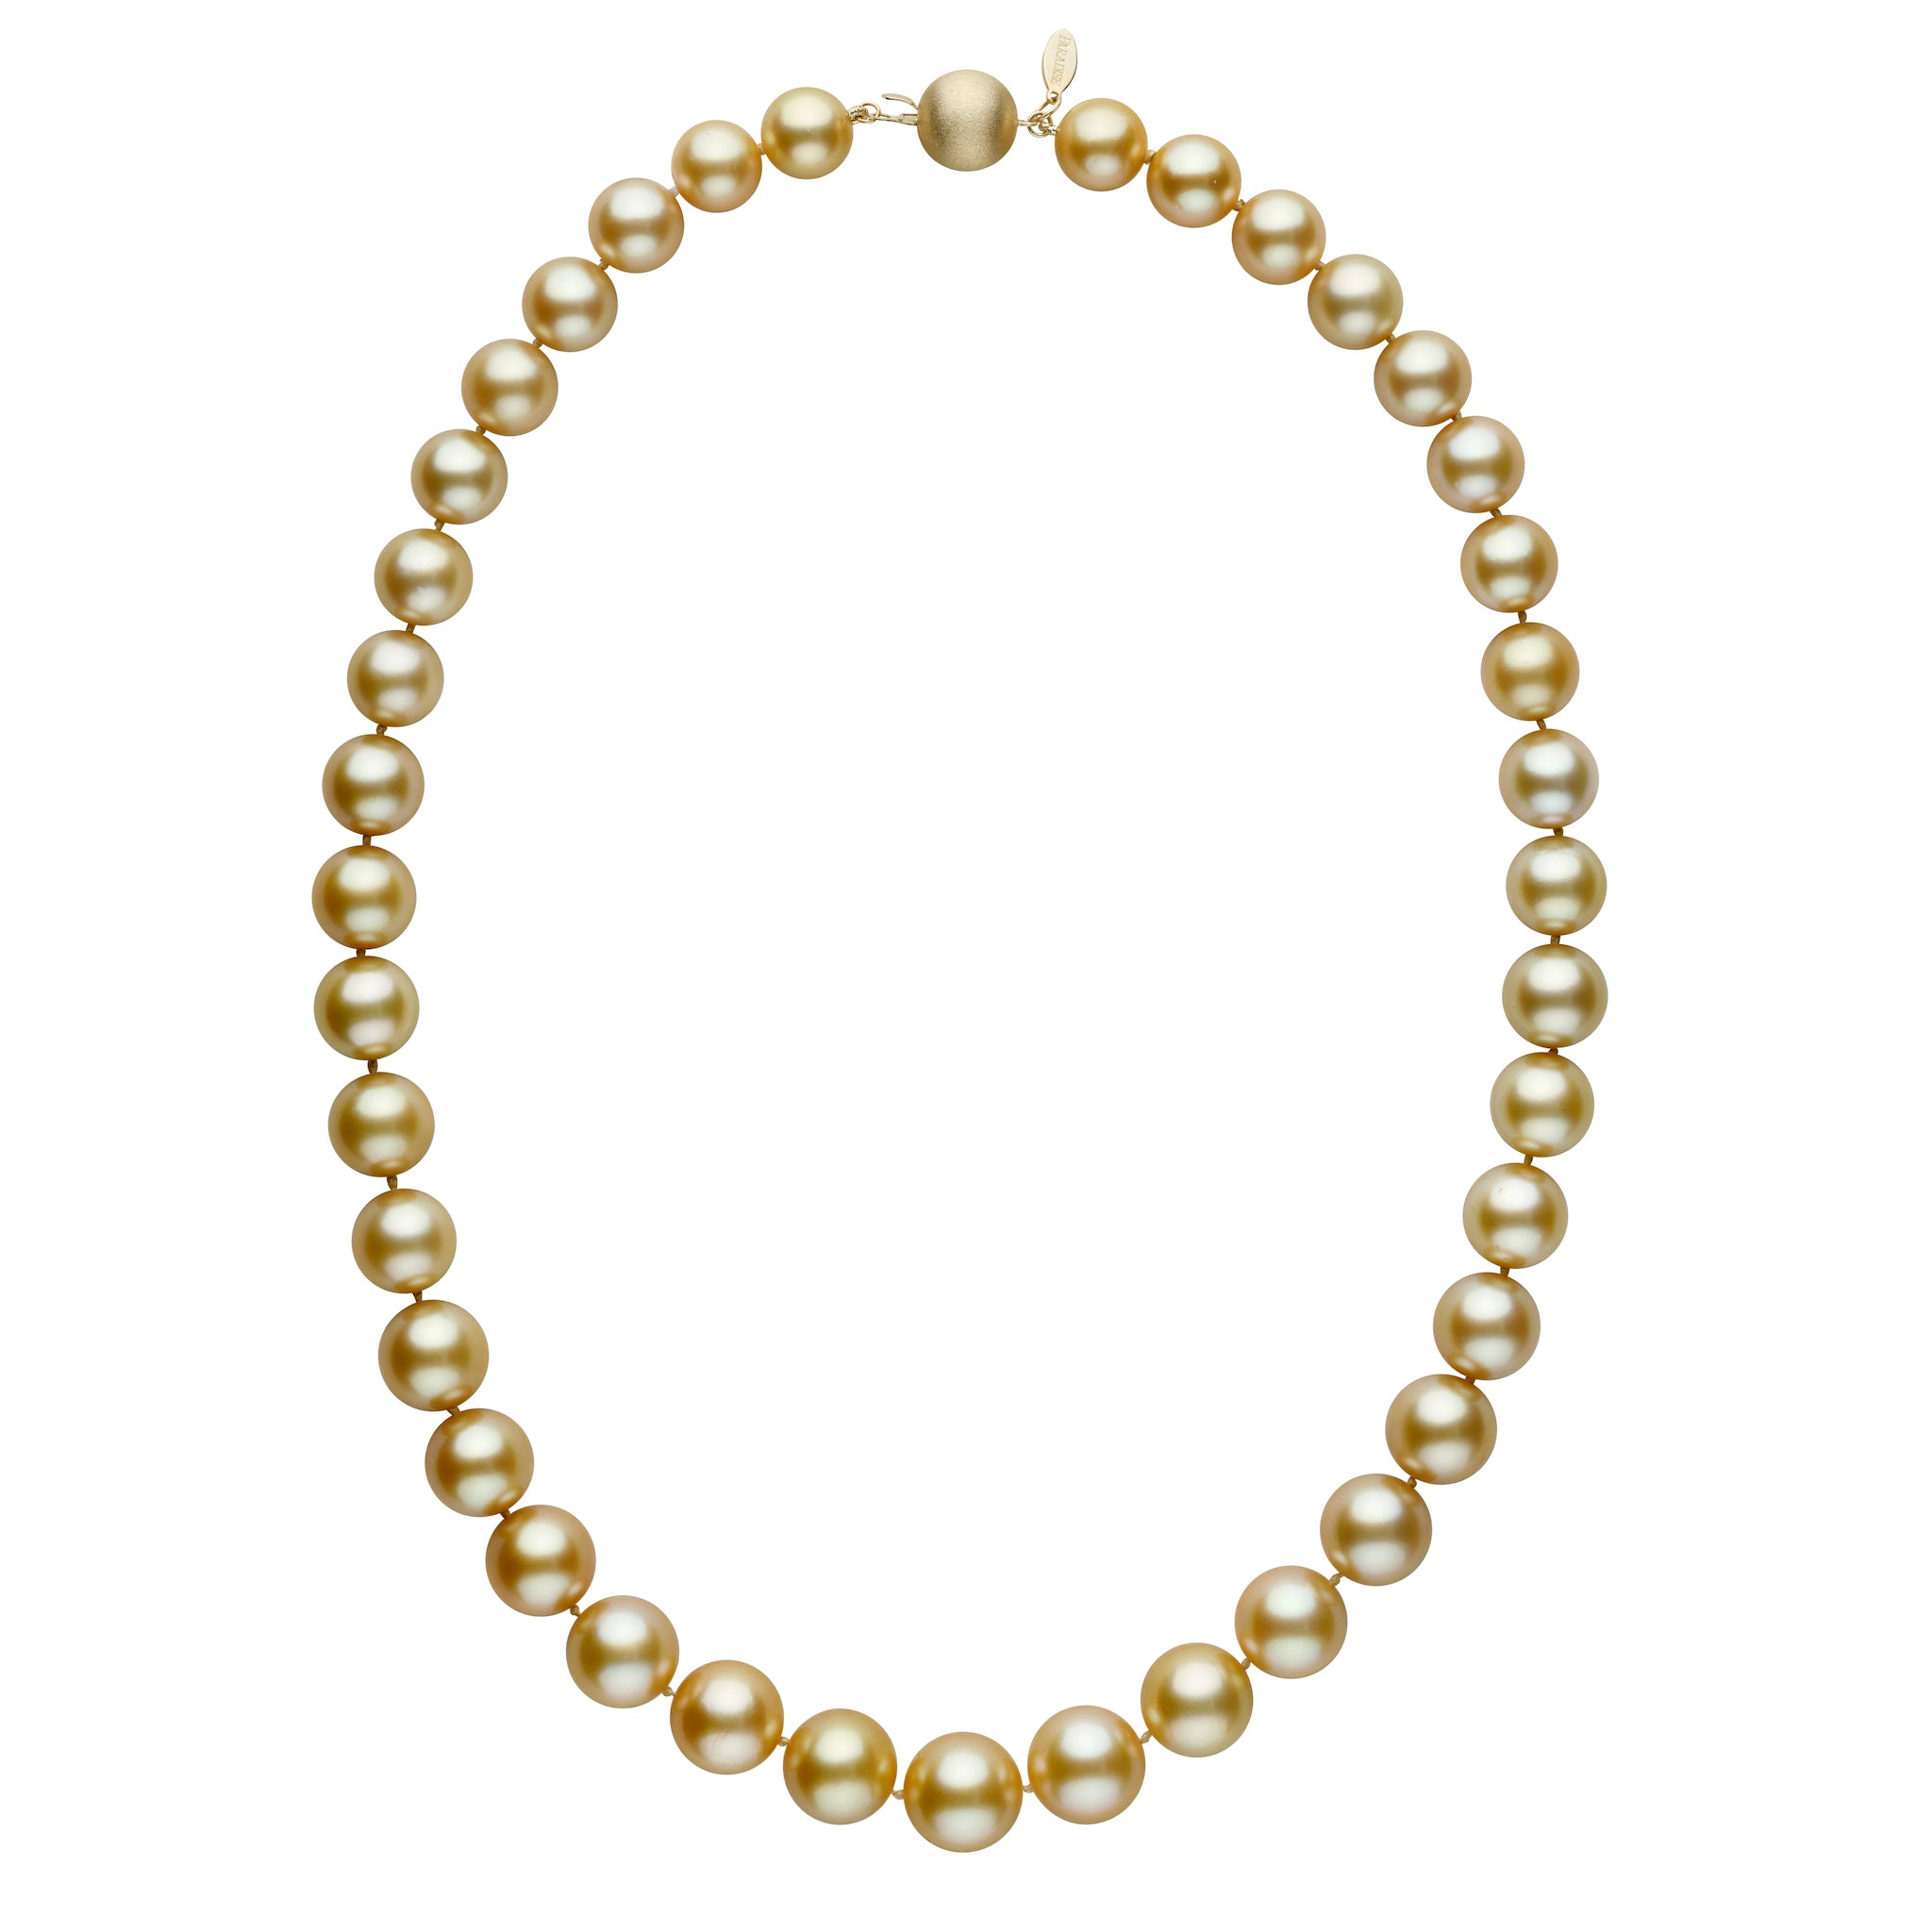 10.1-13.1 mm AAA Golden South Sea Round Pearl Necklace